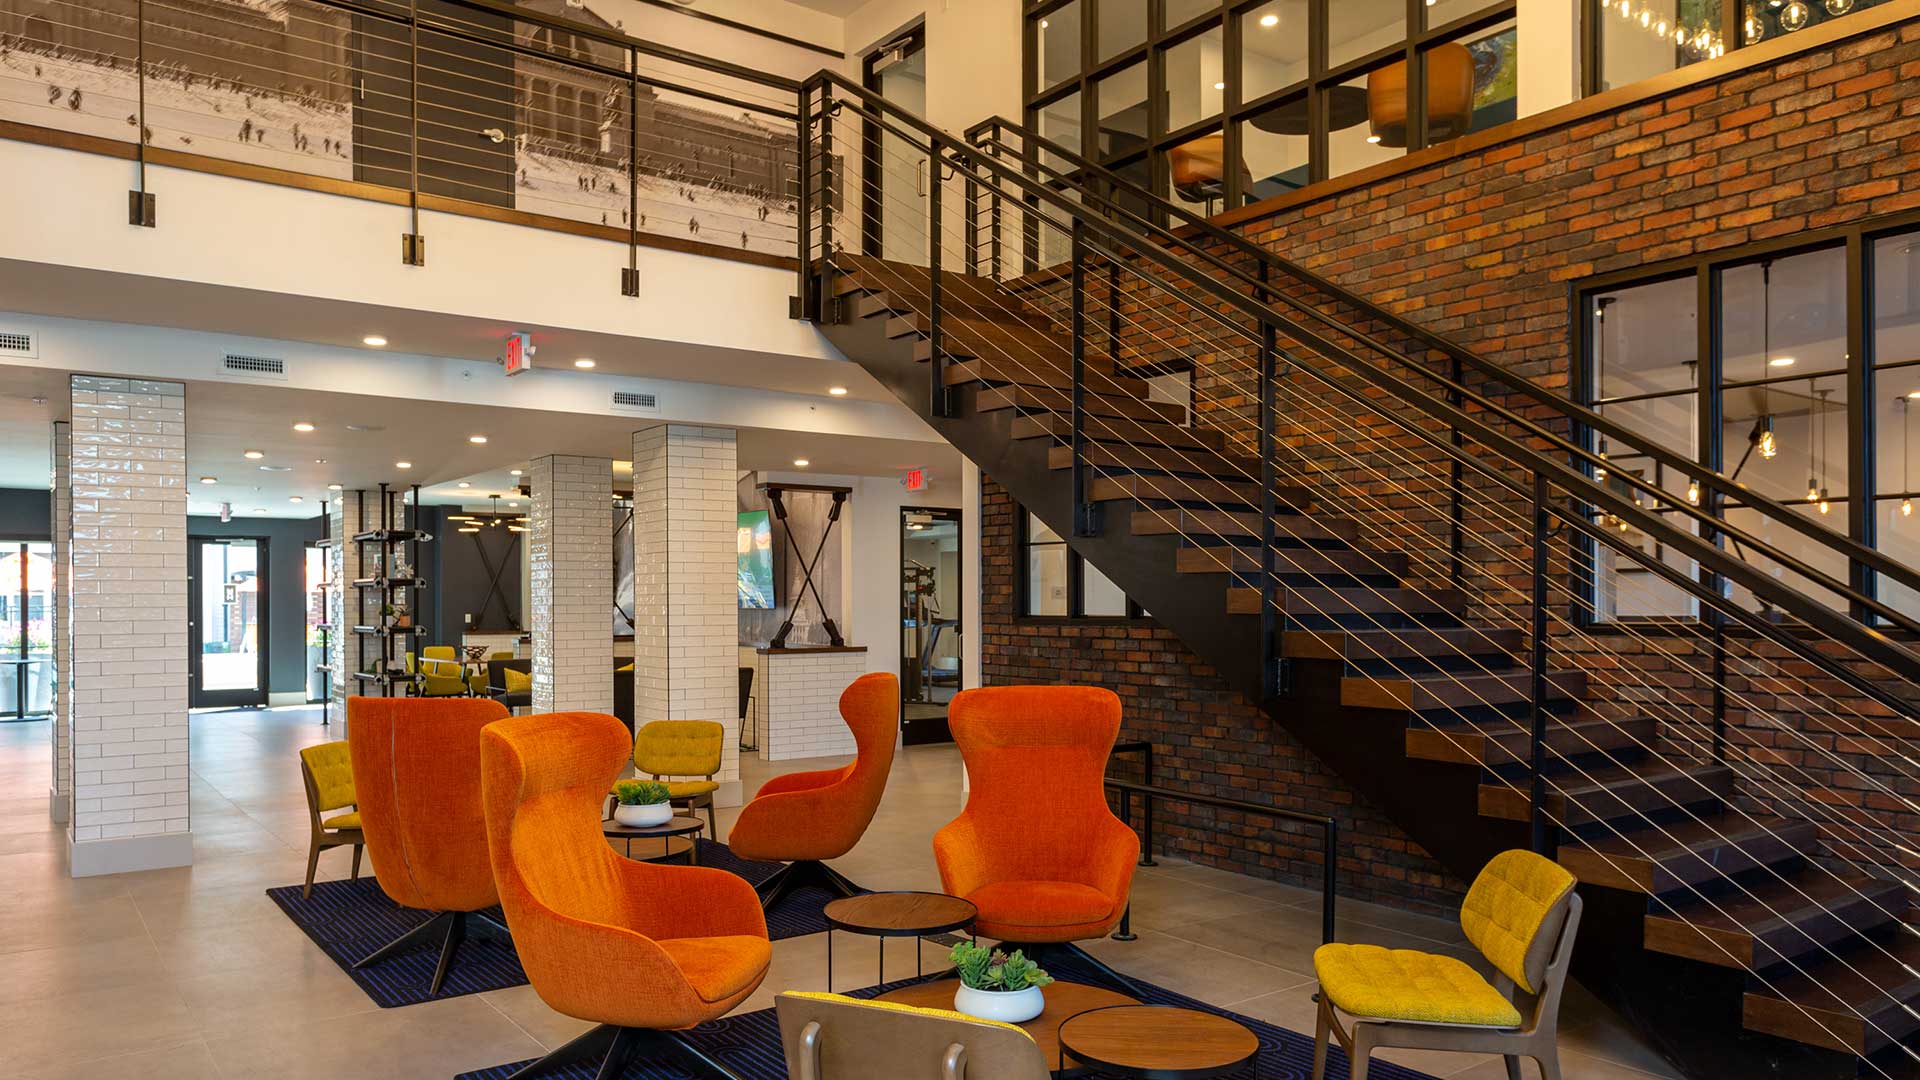 Standing near the front door in Moda at The Hill. Two lounge seating areas are up front with orange and yellow chairs. A stairway leads up along the right wall and off to the left is an open area with more lounge seating.